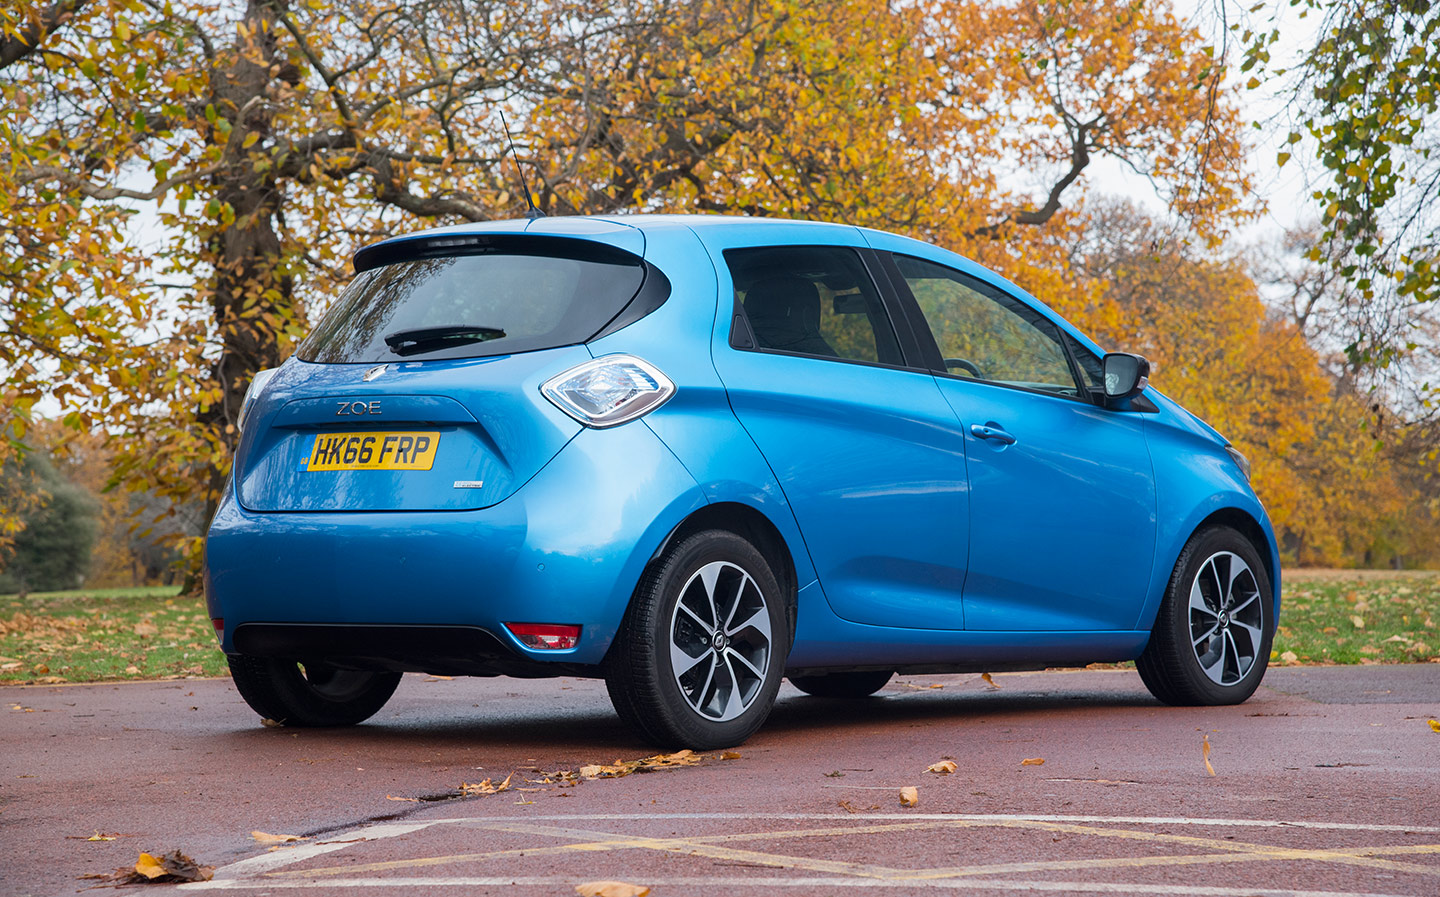 2017 Renault Zoe long-term road test review by Will Dron for Sunday Times Driving